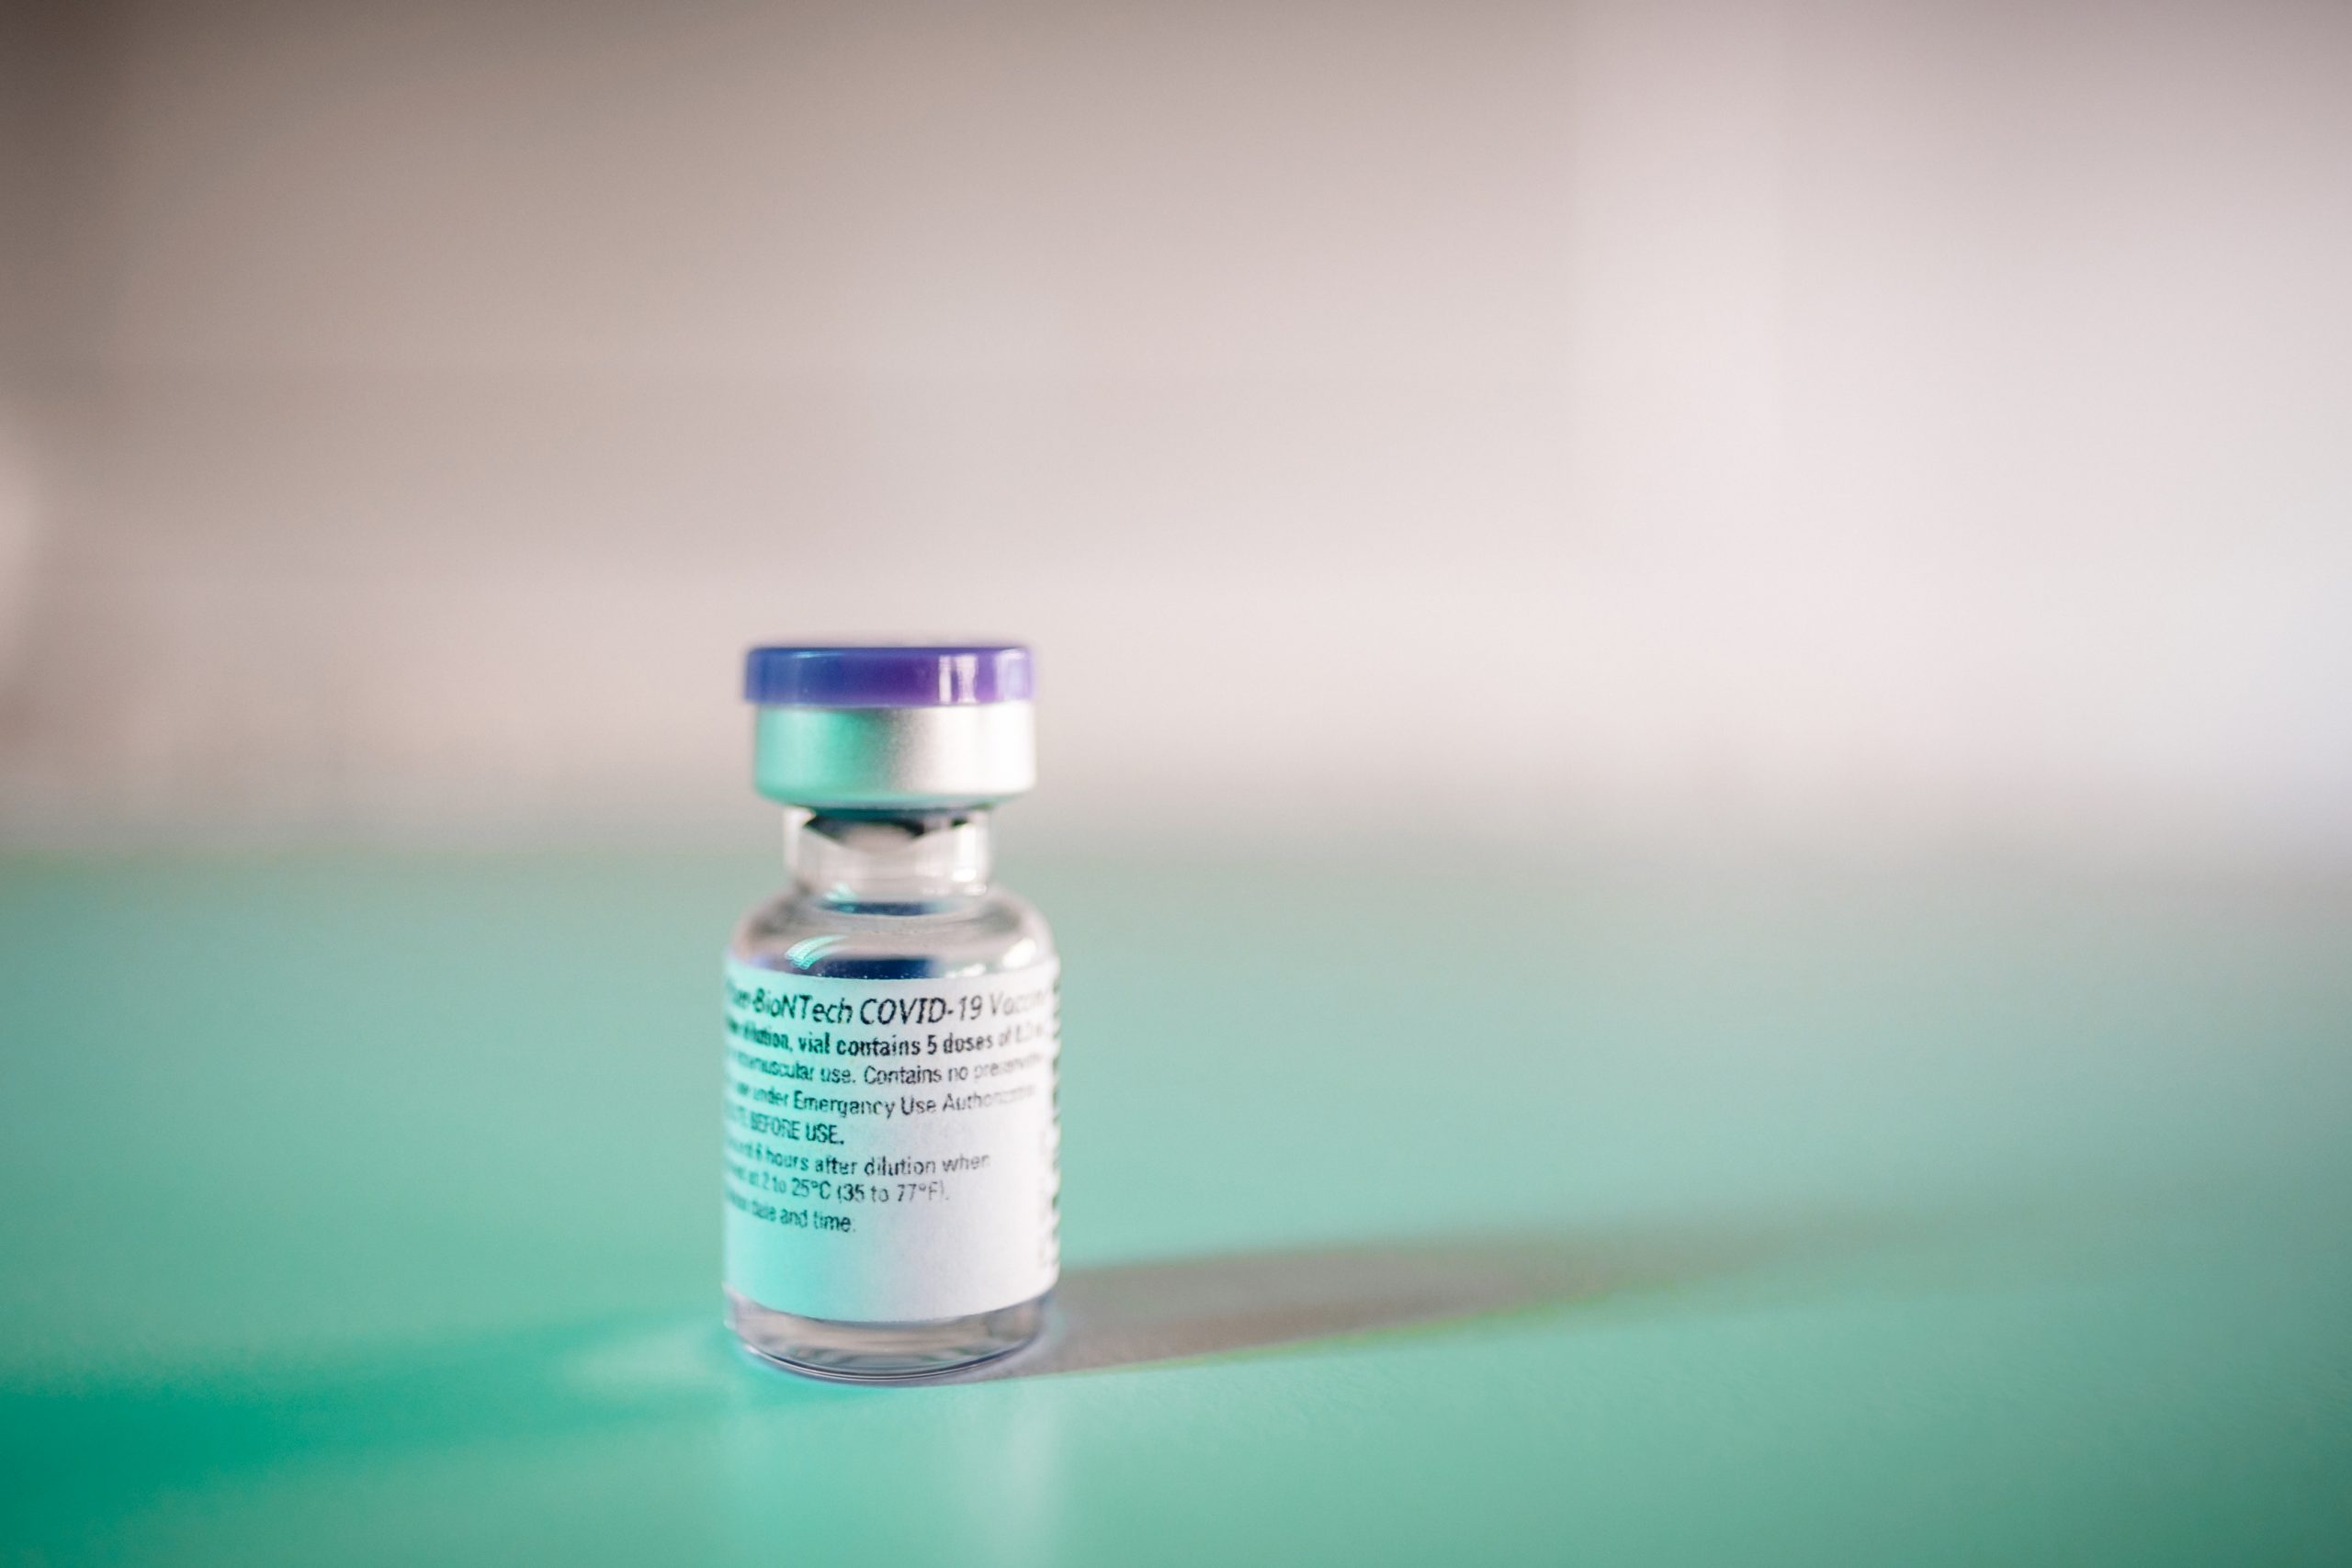 Kids 12 and up eligible for COVID-19 vaccine in Alabama